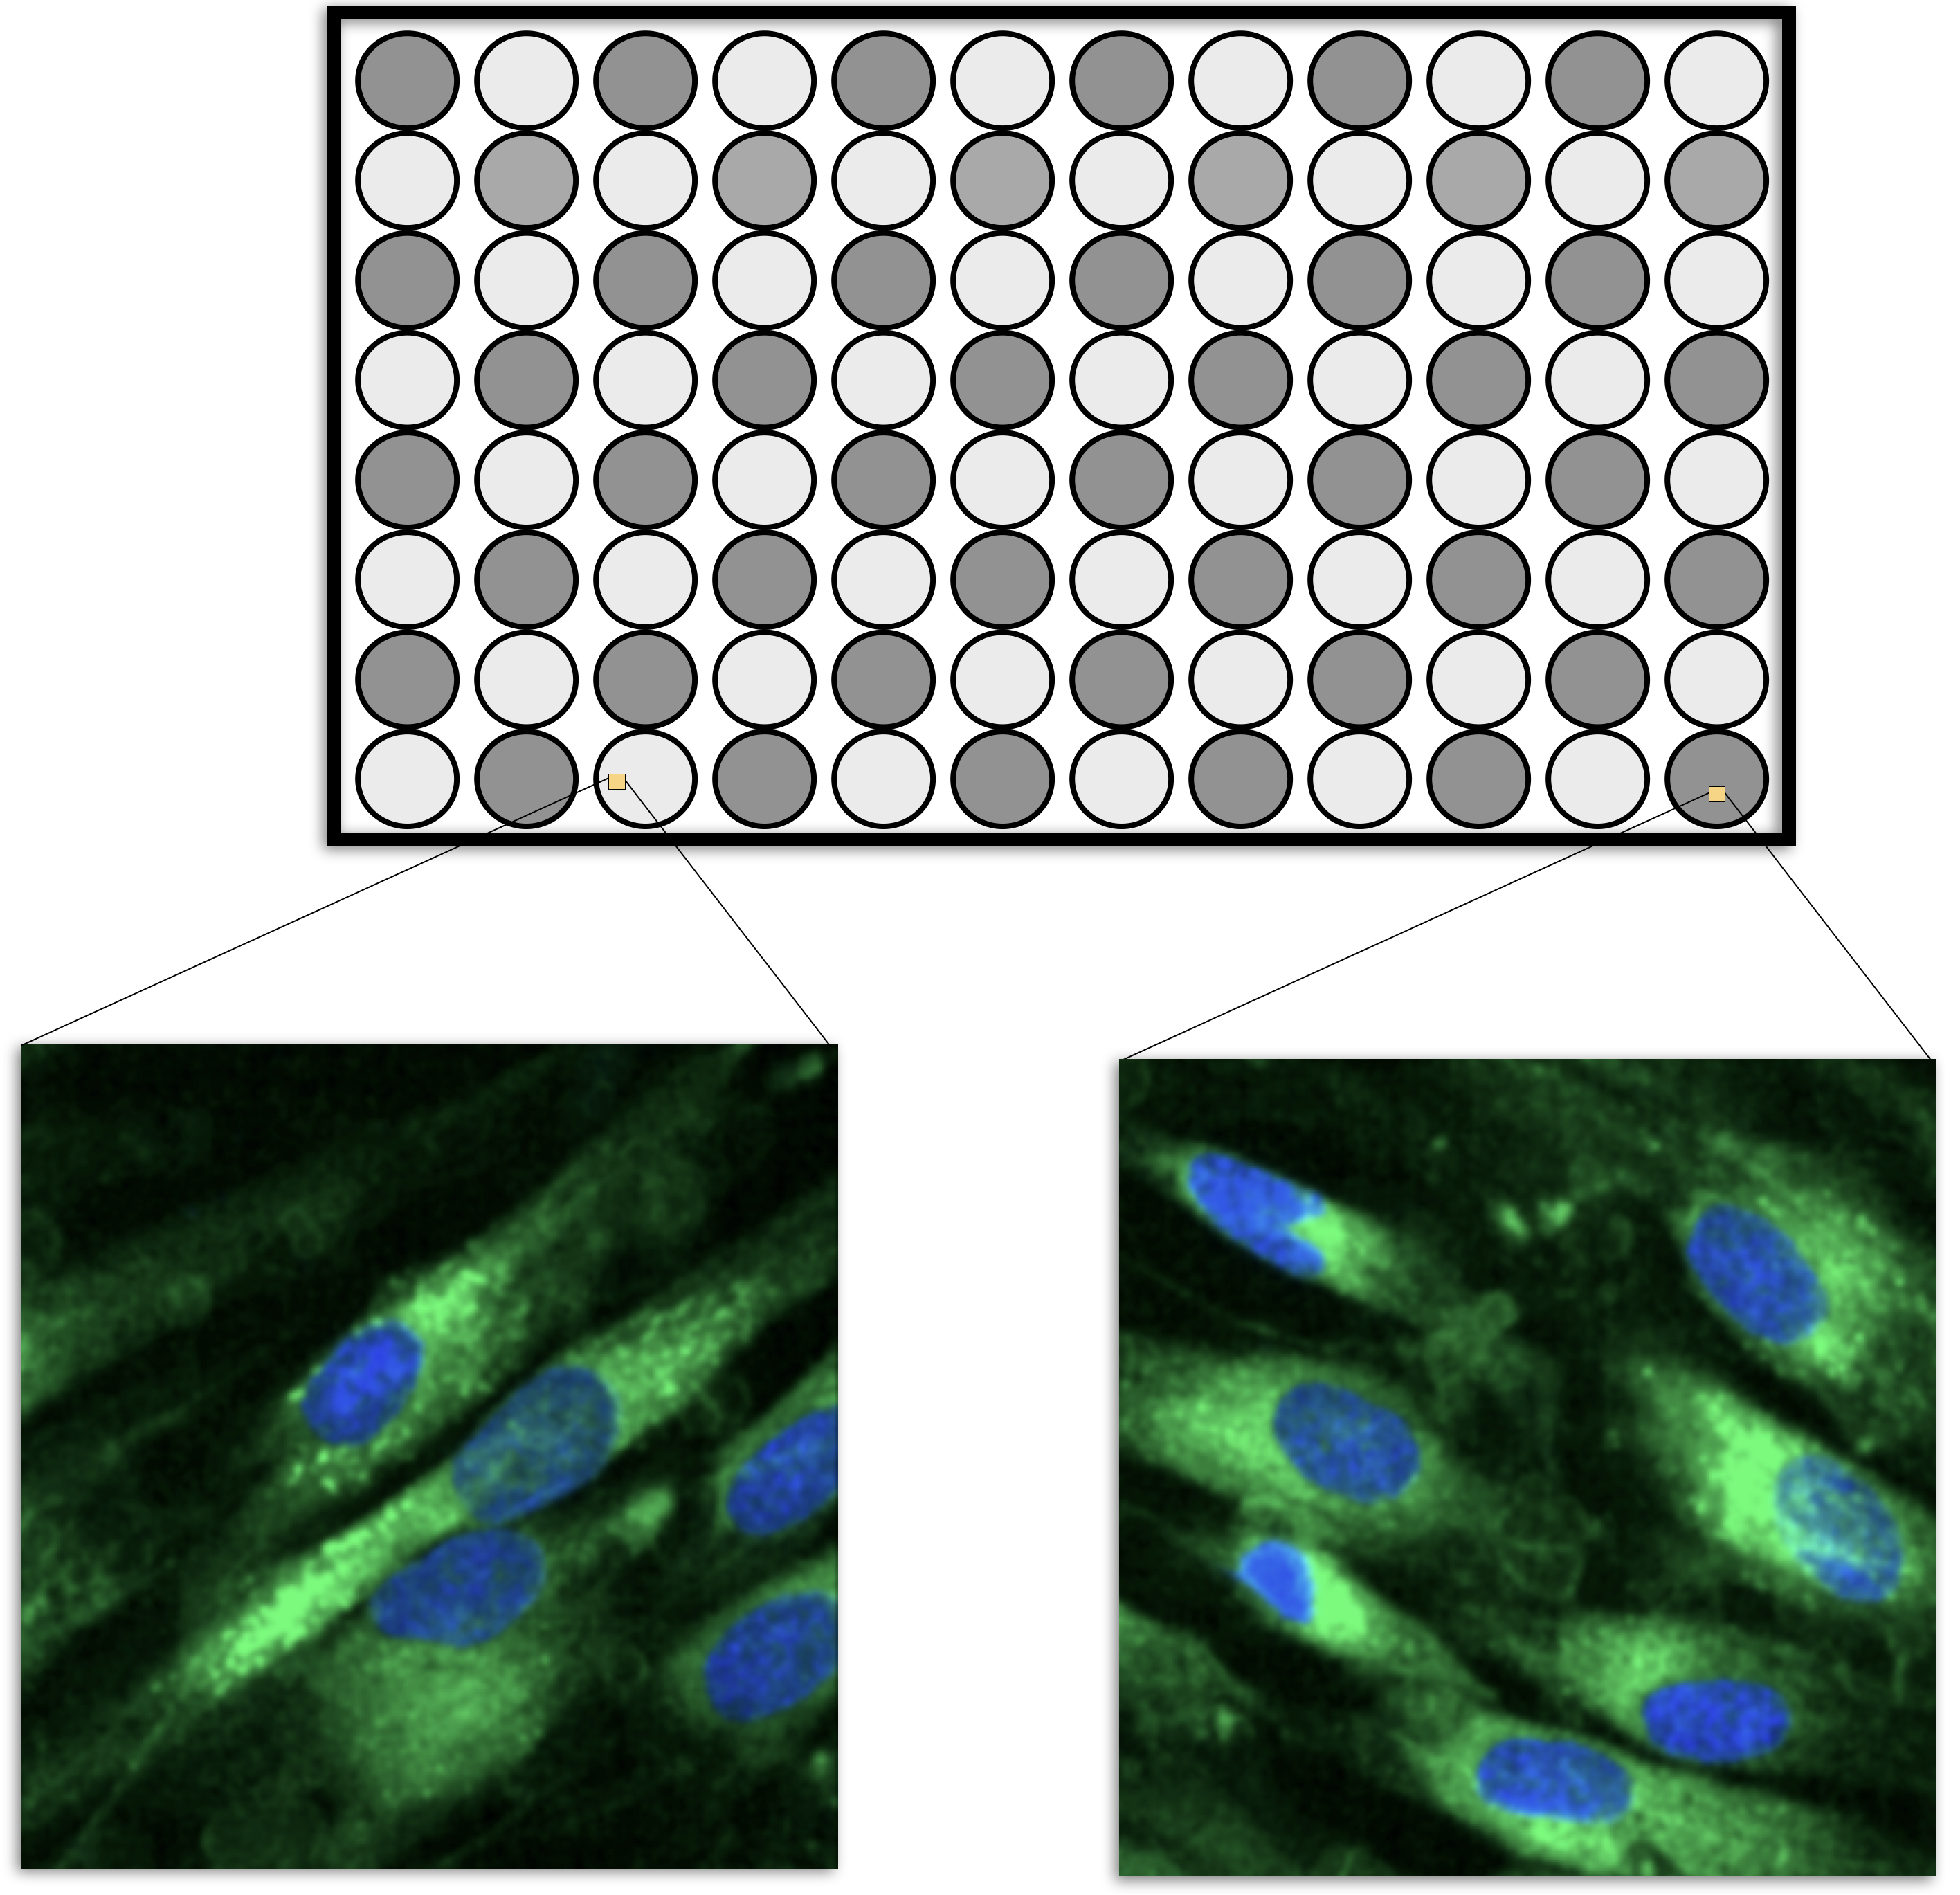 A schematic for the micro-titer plates in high content screening. The dark wells might be treated cells while the lightly colored cell would be controls. Multiple images are taken within each well and the cells in each image are isolated and quantified in different ways. The green represents the cell boundary and the blue describes the nucleus.